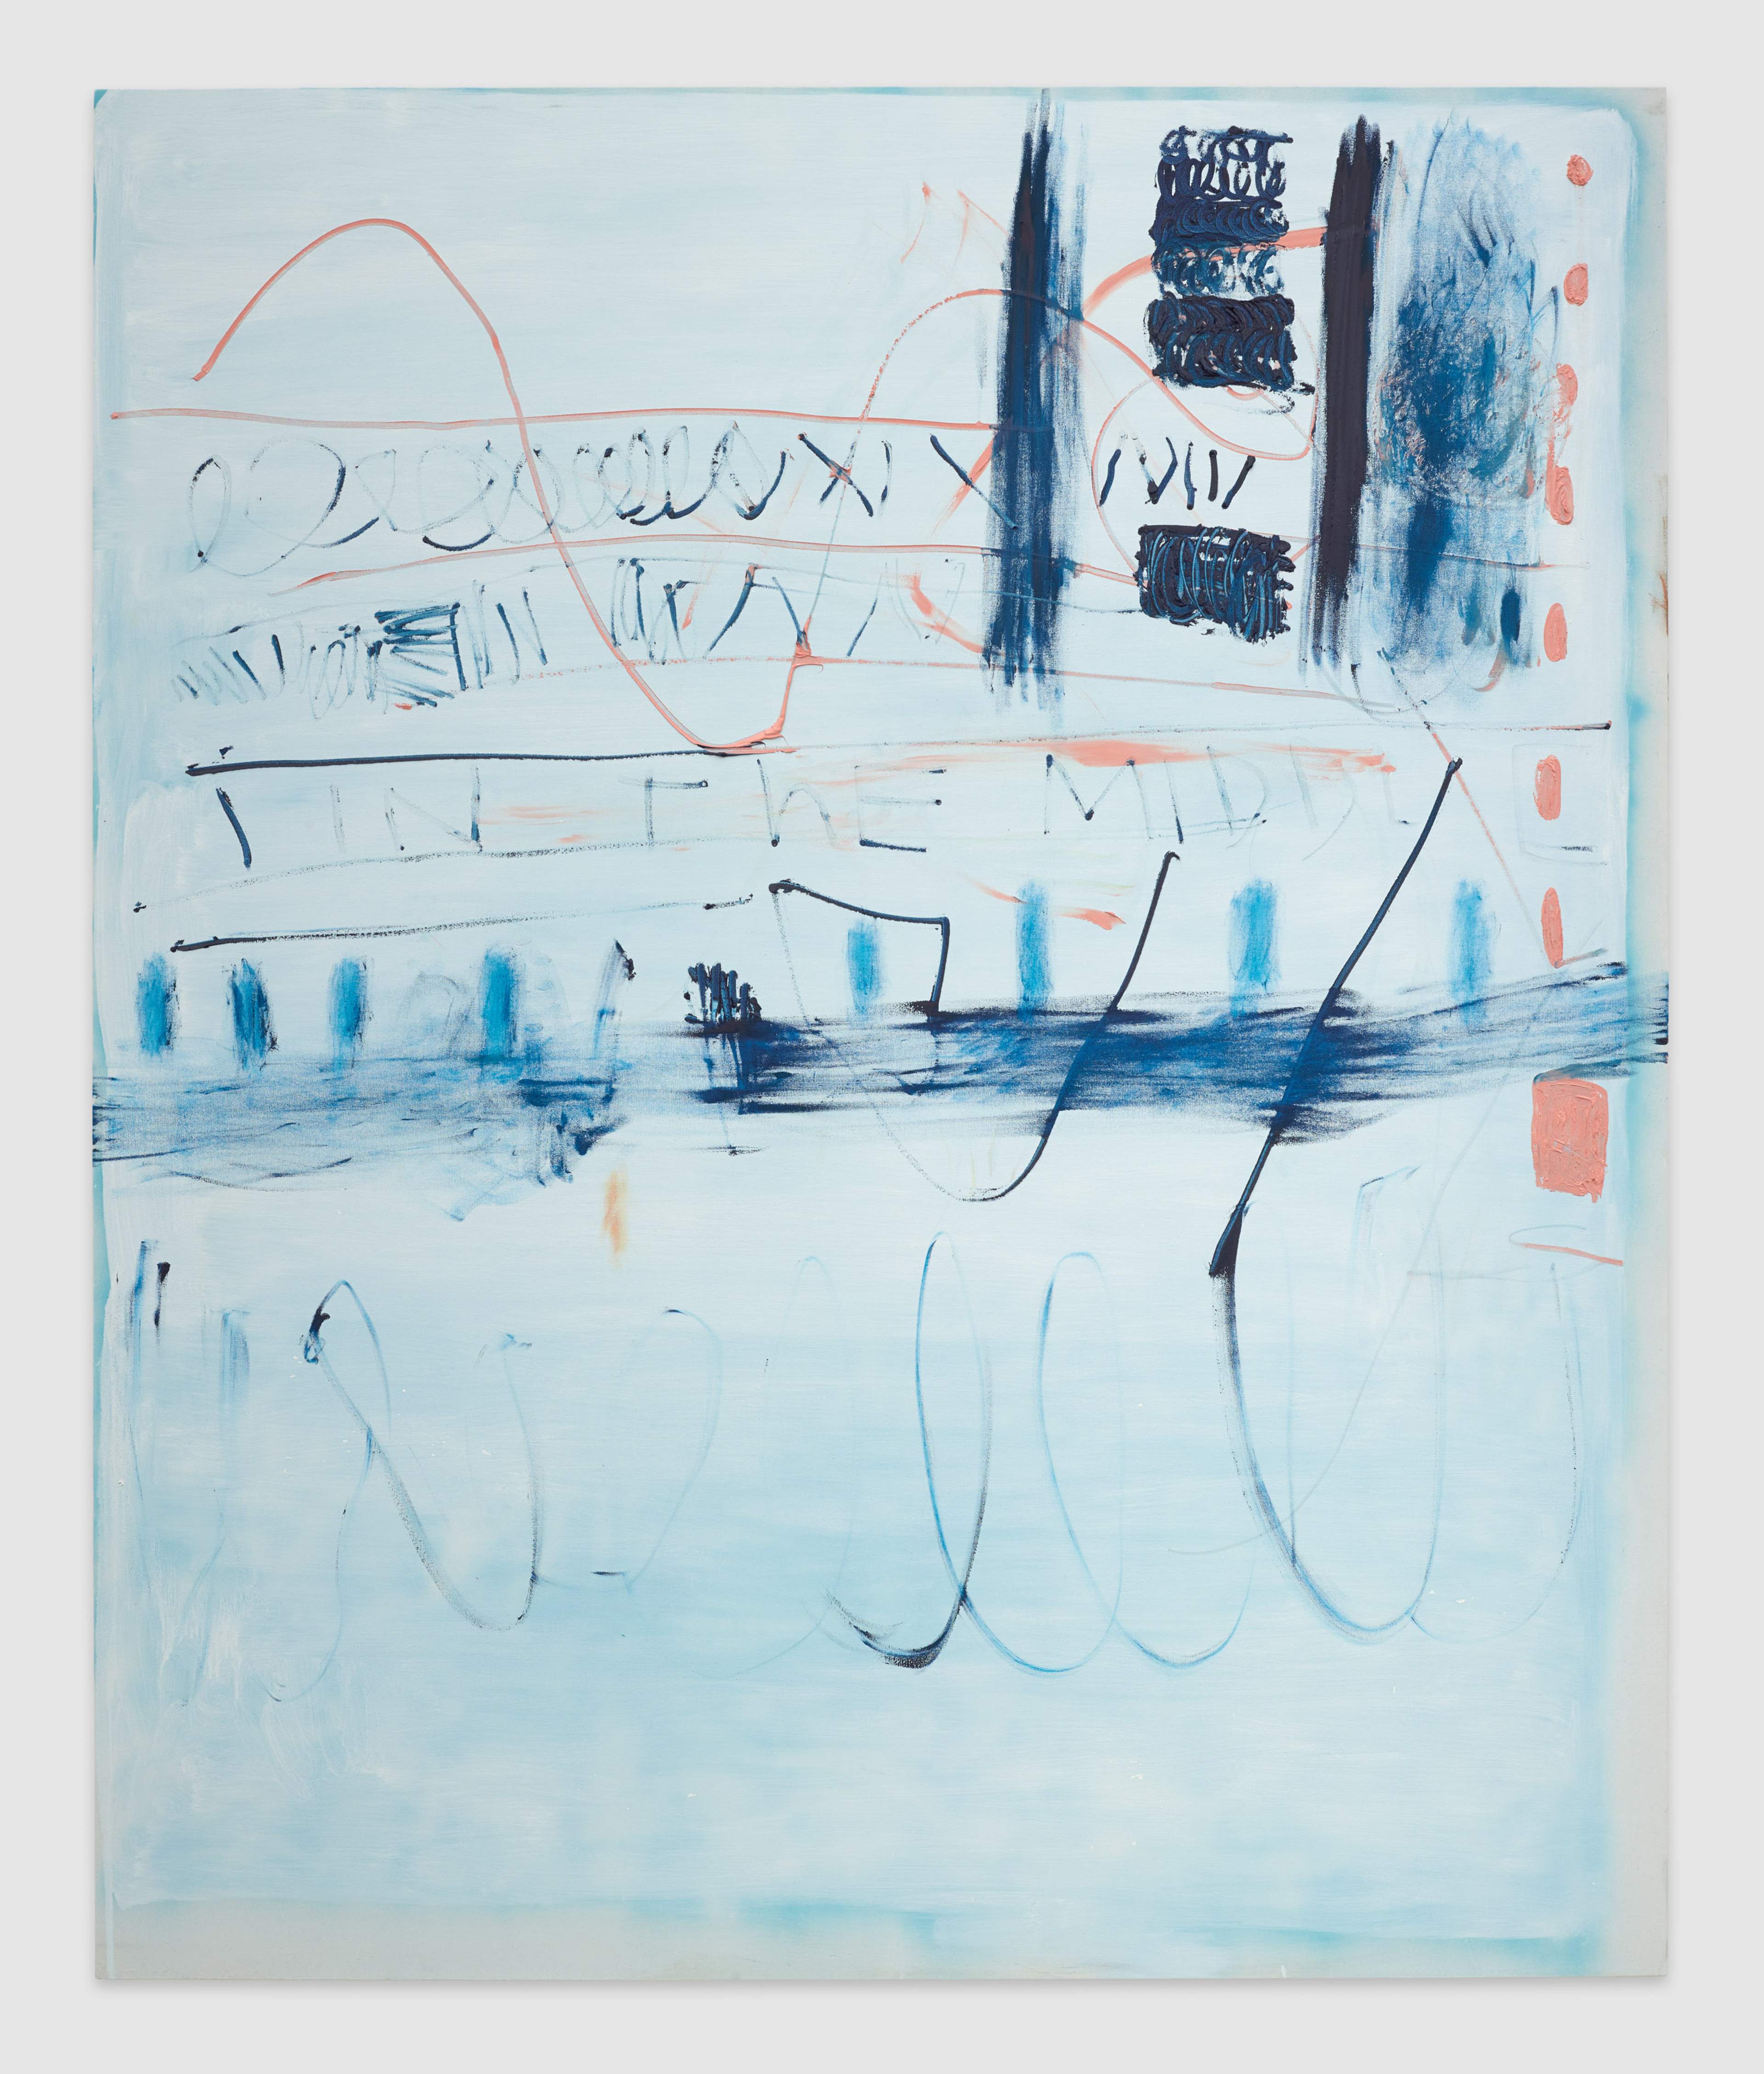 Sebastian Helling, Untitled (Blue), 2015, spray and oil paint on canvas, 220x185 cm